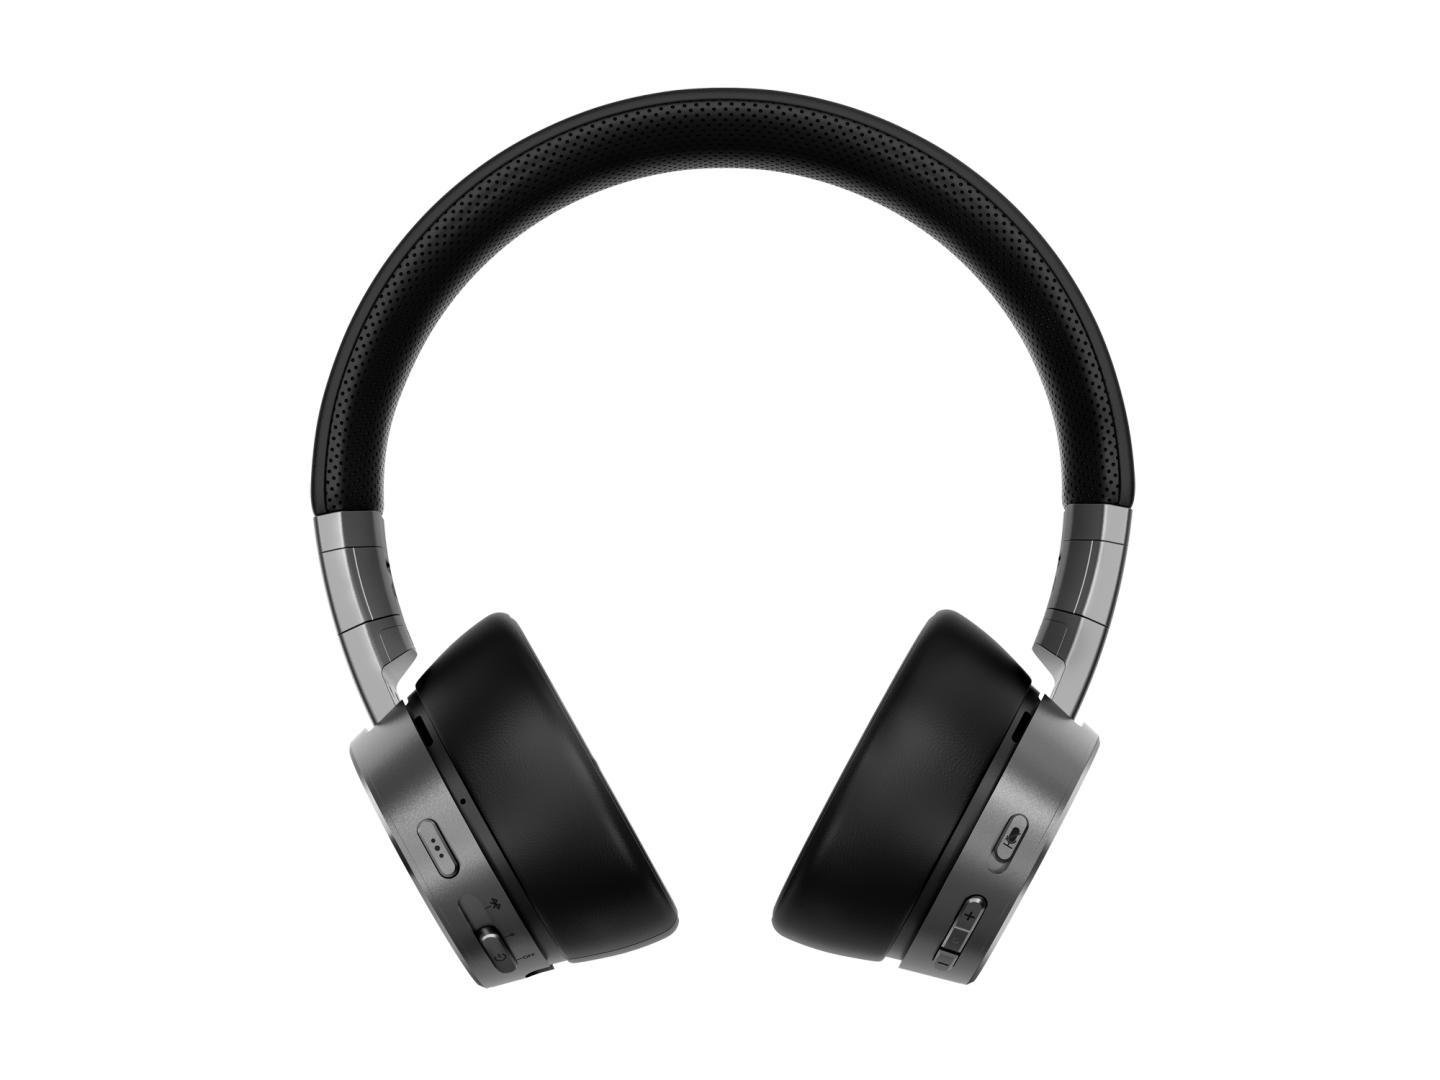 Lenovo ThinkPad X1 Active Noise Cancellation Headphones, Bluetooth 5.0, Battery Capacity 800 mAh, Battery Charging Time 3h, Play Time 14h, Wireless Operating Distance 10m, Impedance 32 ohm, Sensitivity > 111 dBm +/- 3 dBm, Distortion 5%, Microphone: 4 x analog microphones: Omni- directional